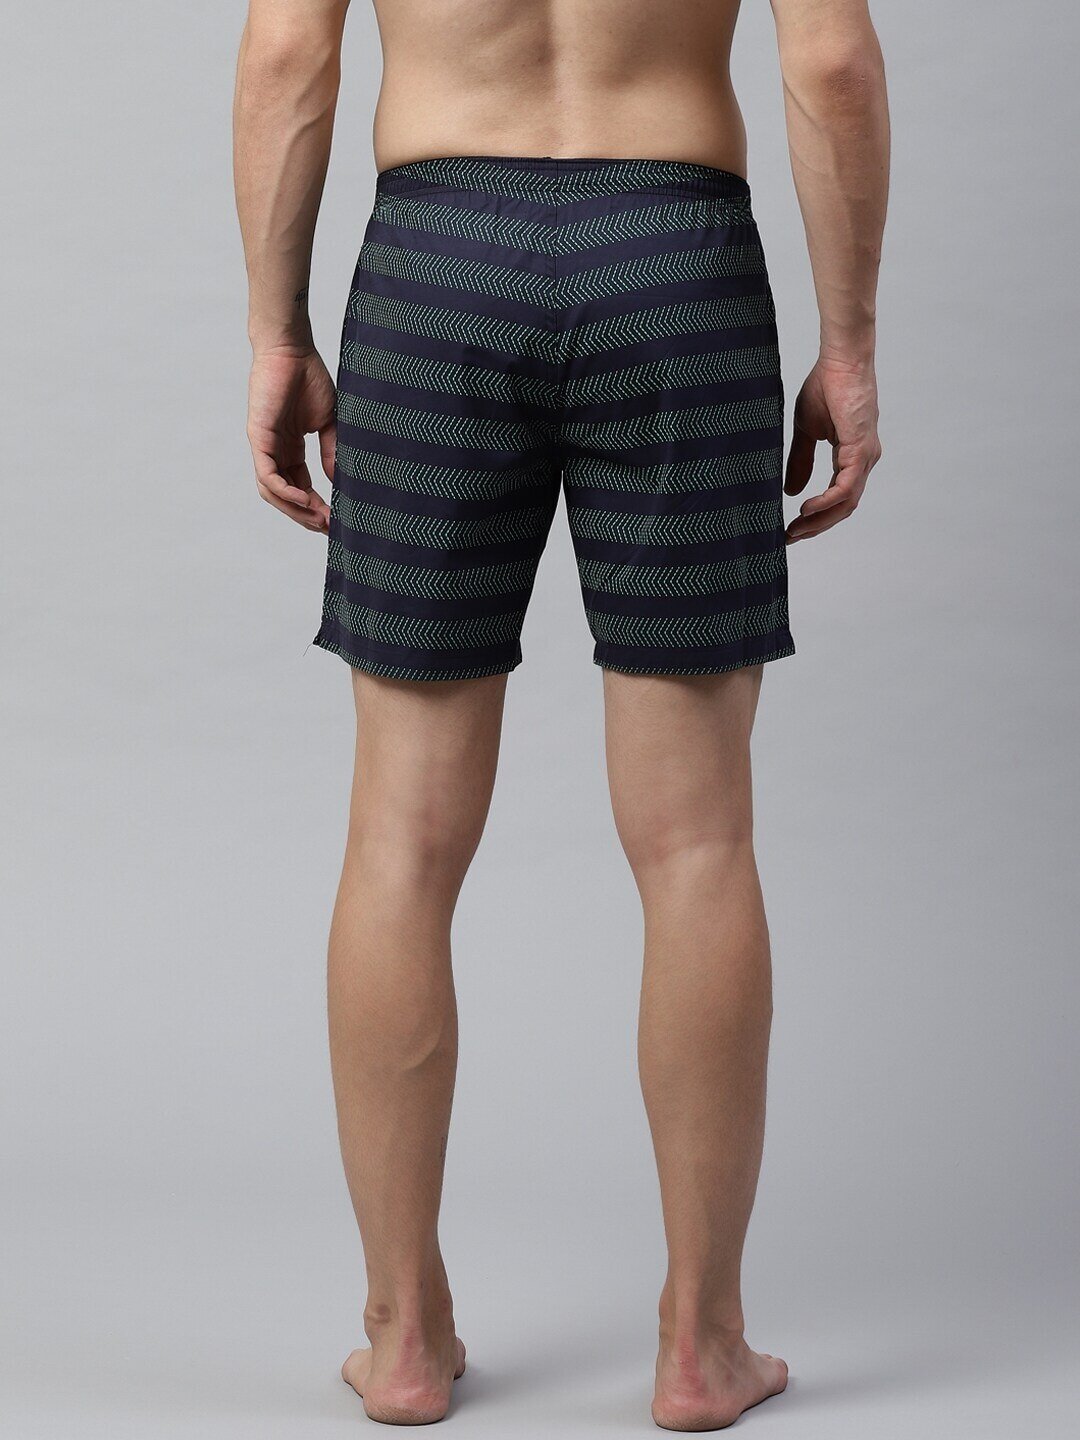 Men Assorted Striped Antimicrobial Boxers #023-BOXER SHORTS-300 ls-023